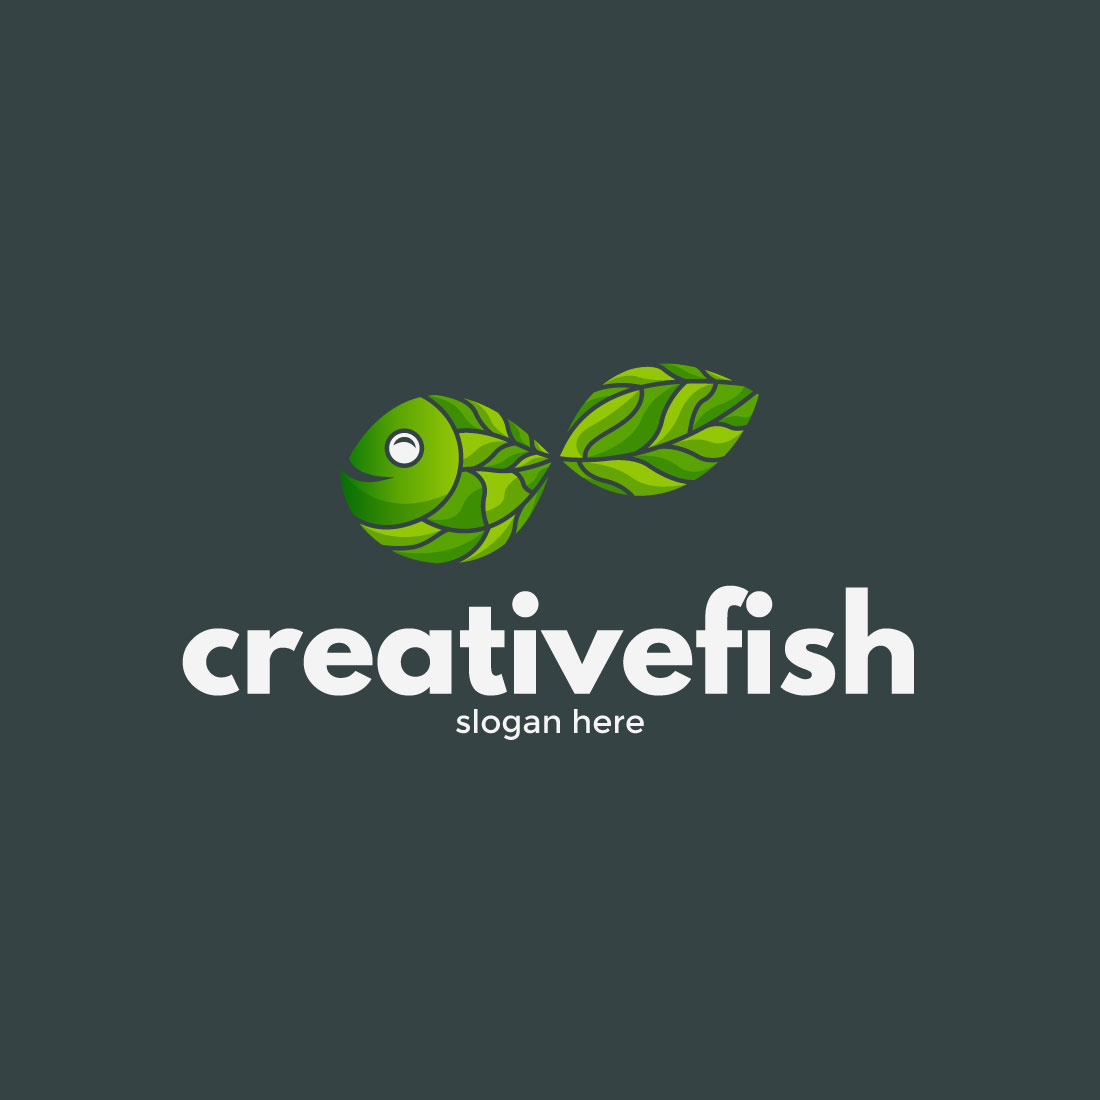 Logo for a company called creative fish.